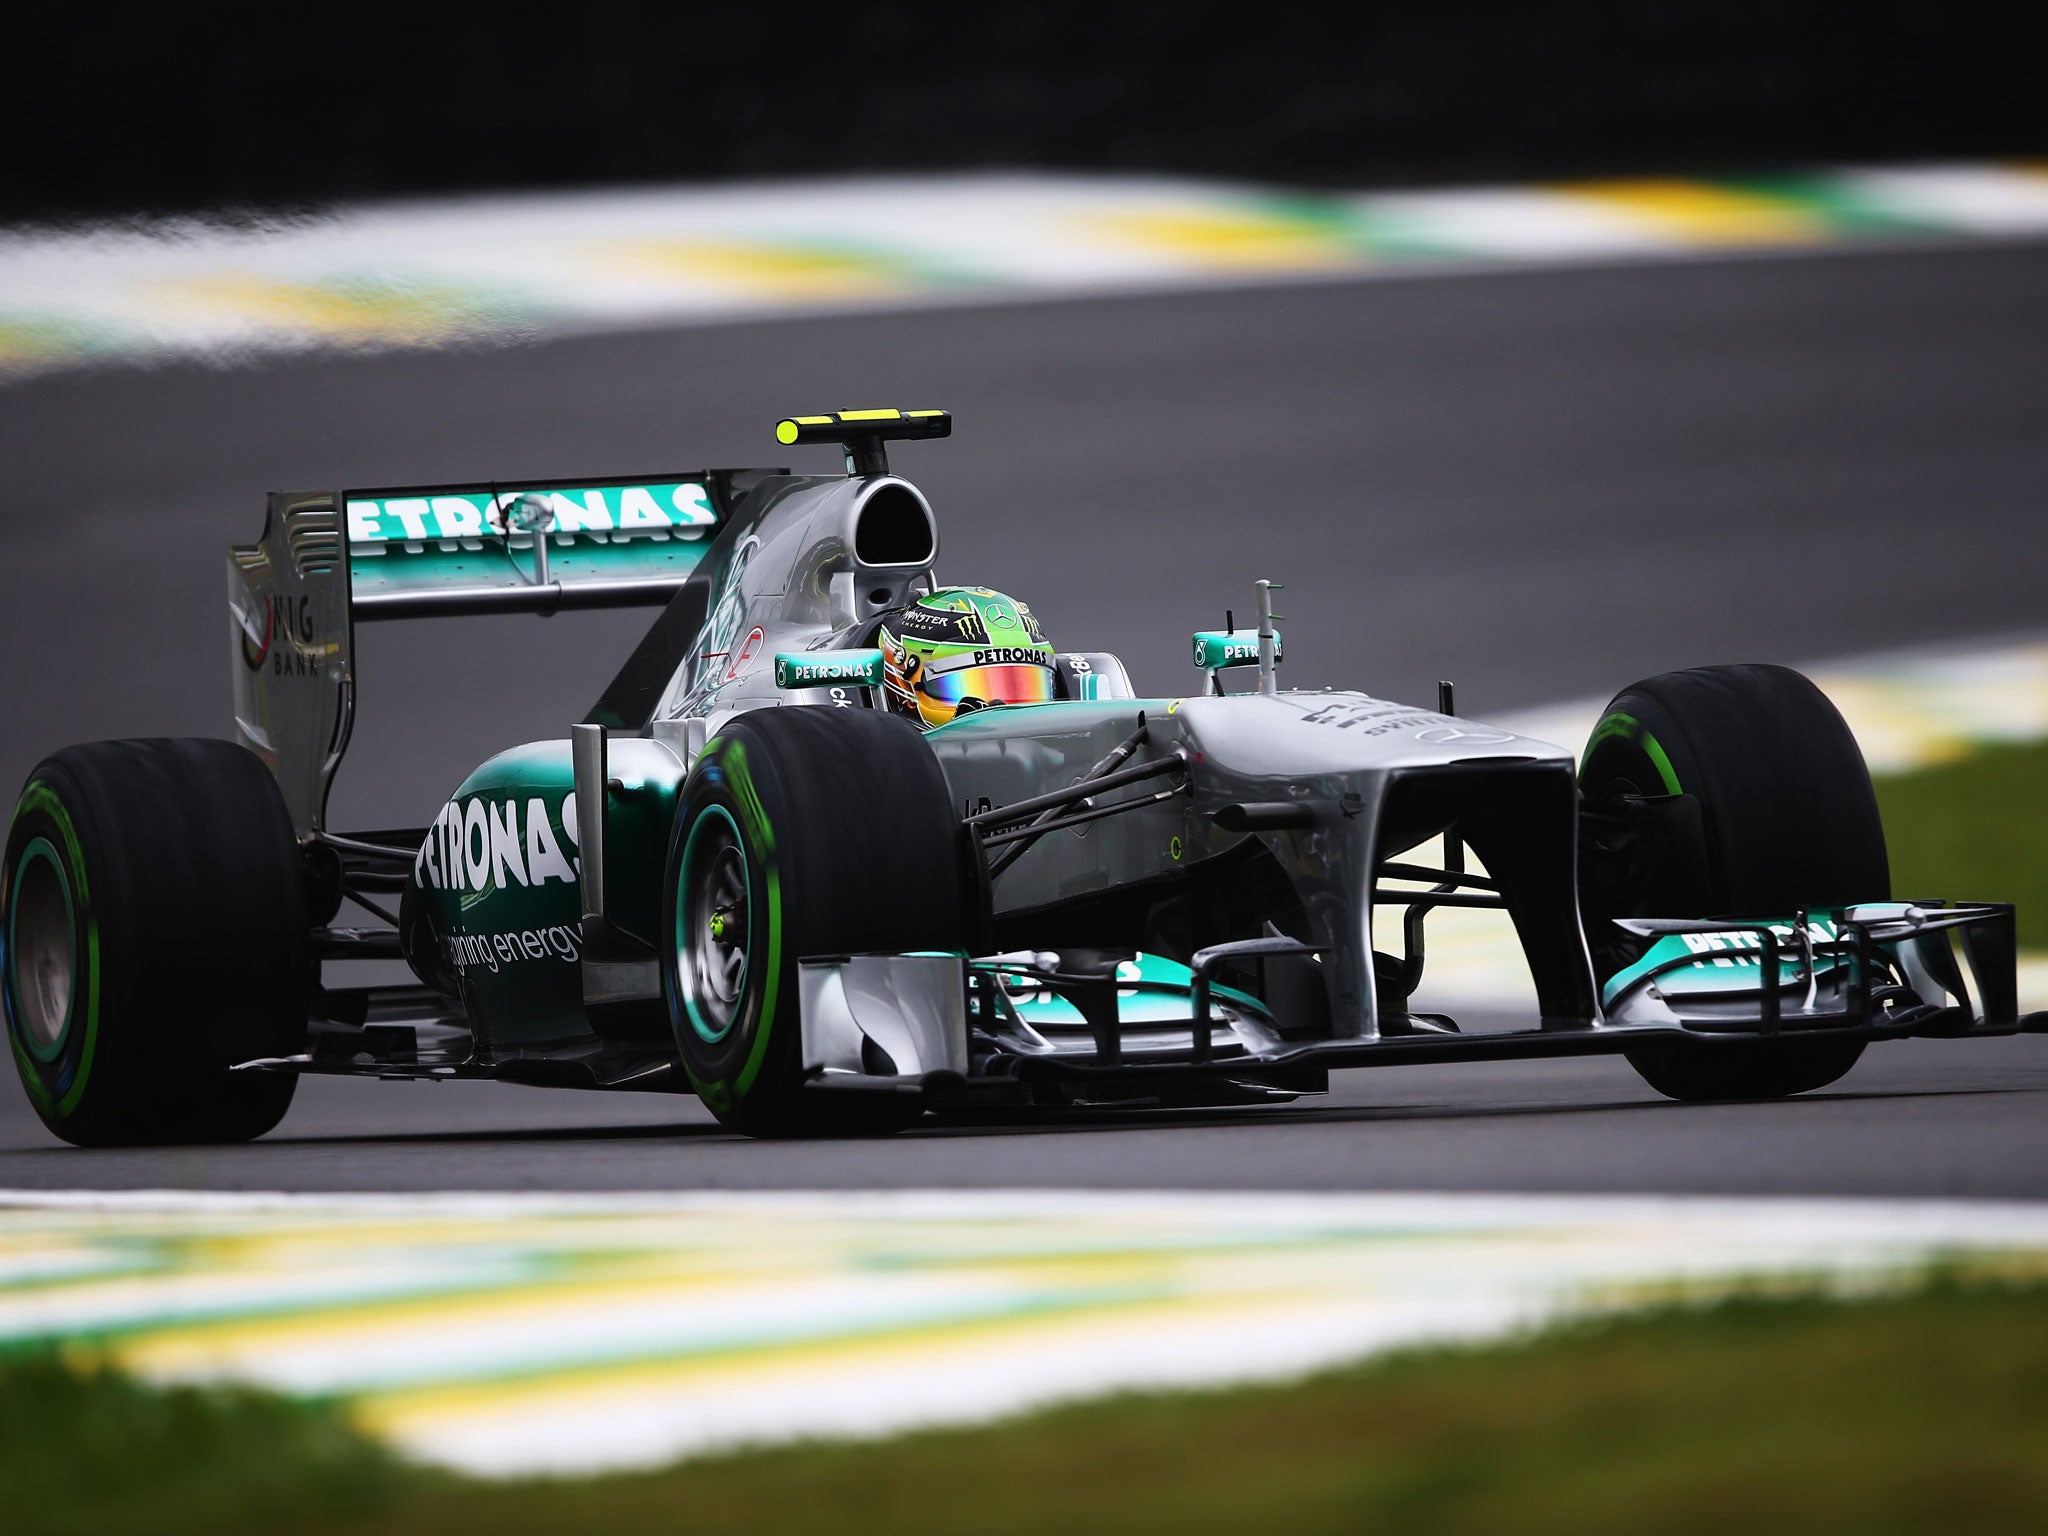 Lewis Hamilton at the wheel of his Mercedes during qualifying in Brazil